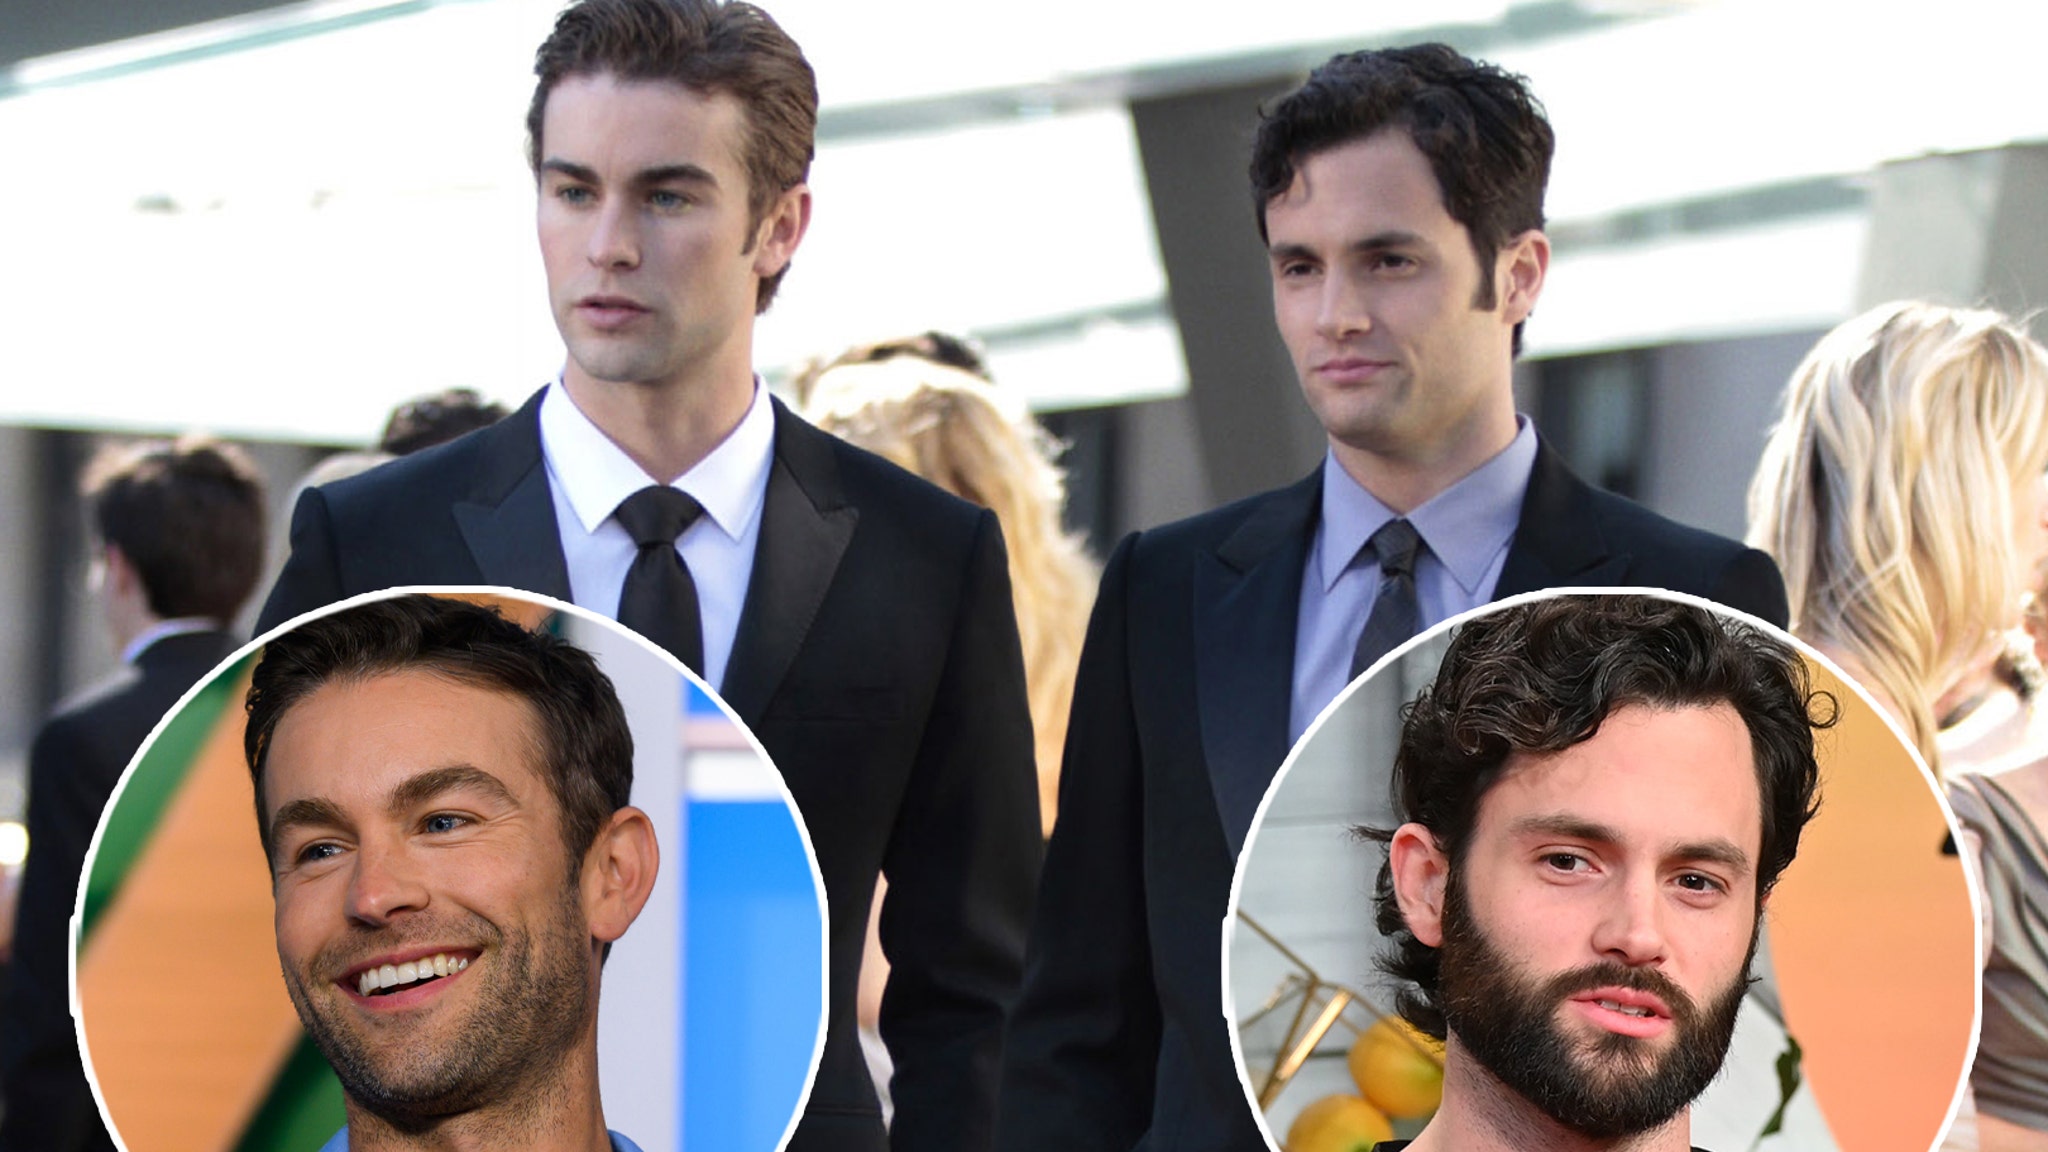 See What the OG Cast of Gossip Girl Looks Like Now